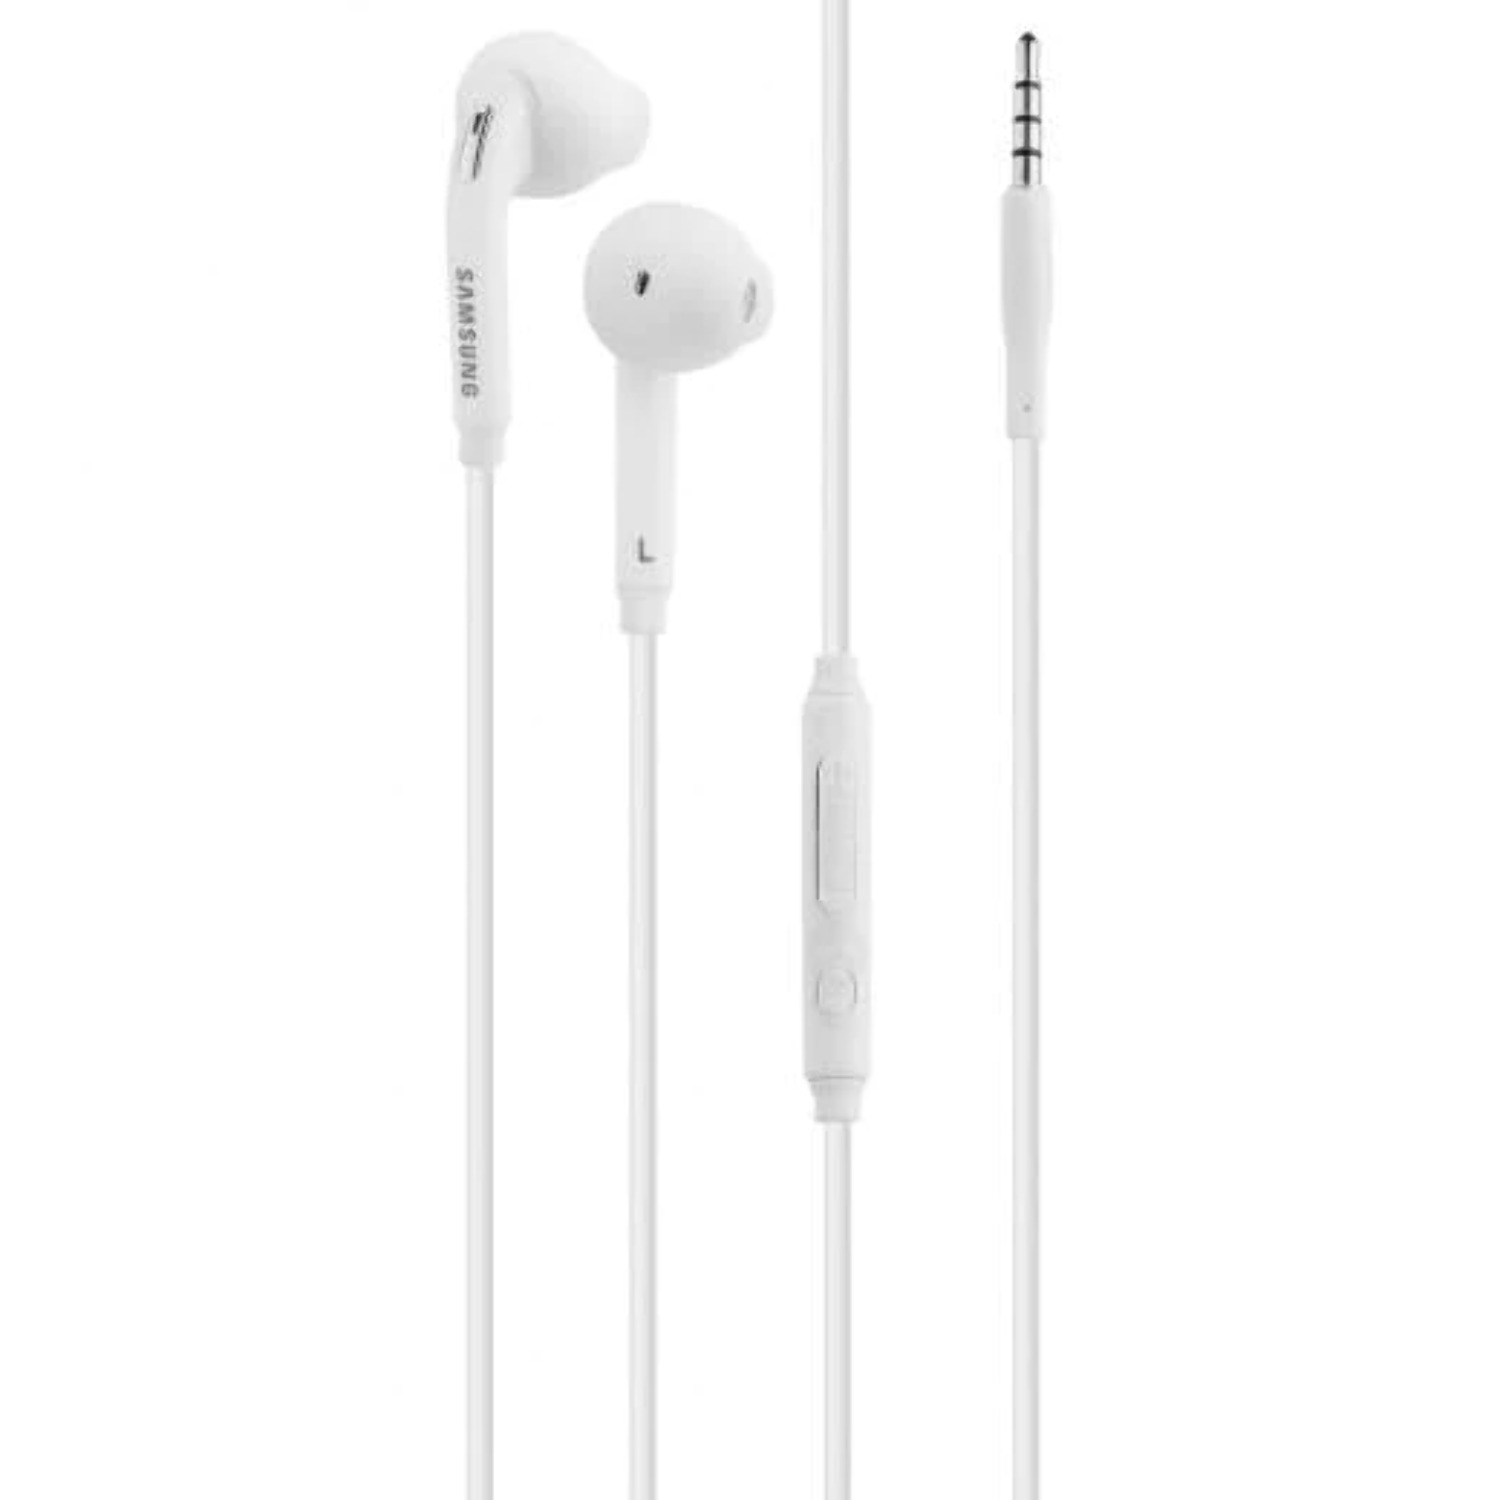 Premium Wired Headset 3.5mm Earbud Stereo In-Ear Headphones with in-line Remote & Microphone Compatible with BlackBerry Q10 - image 1 of 1